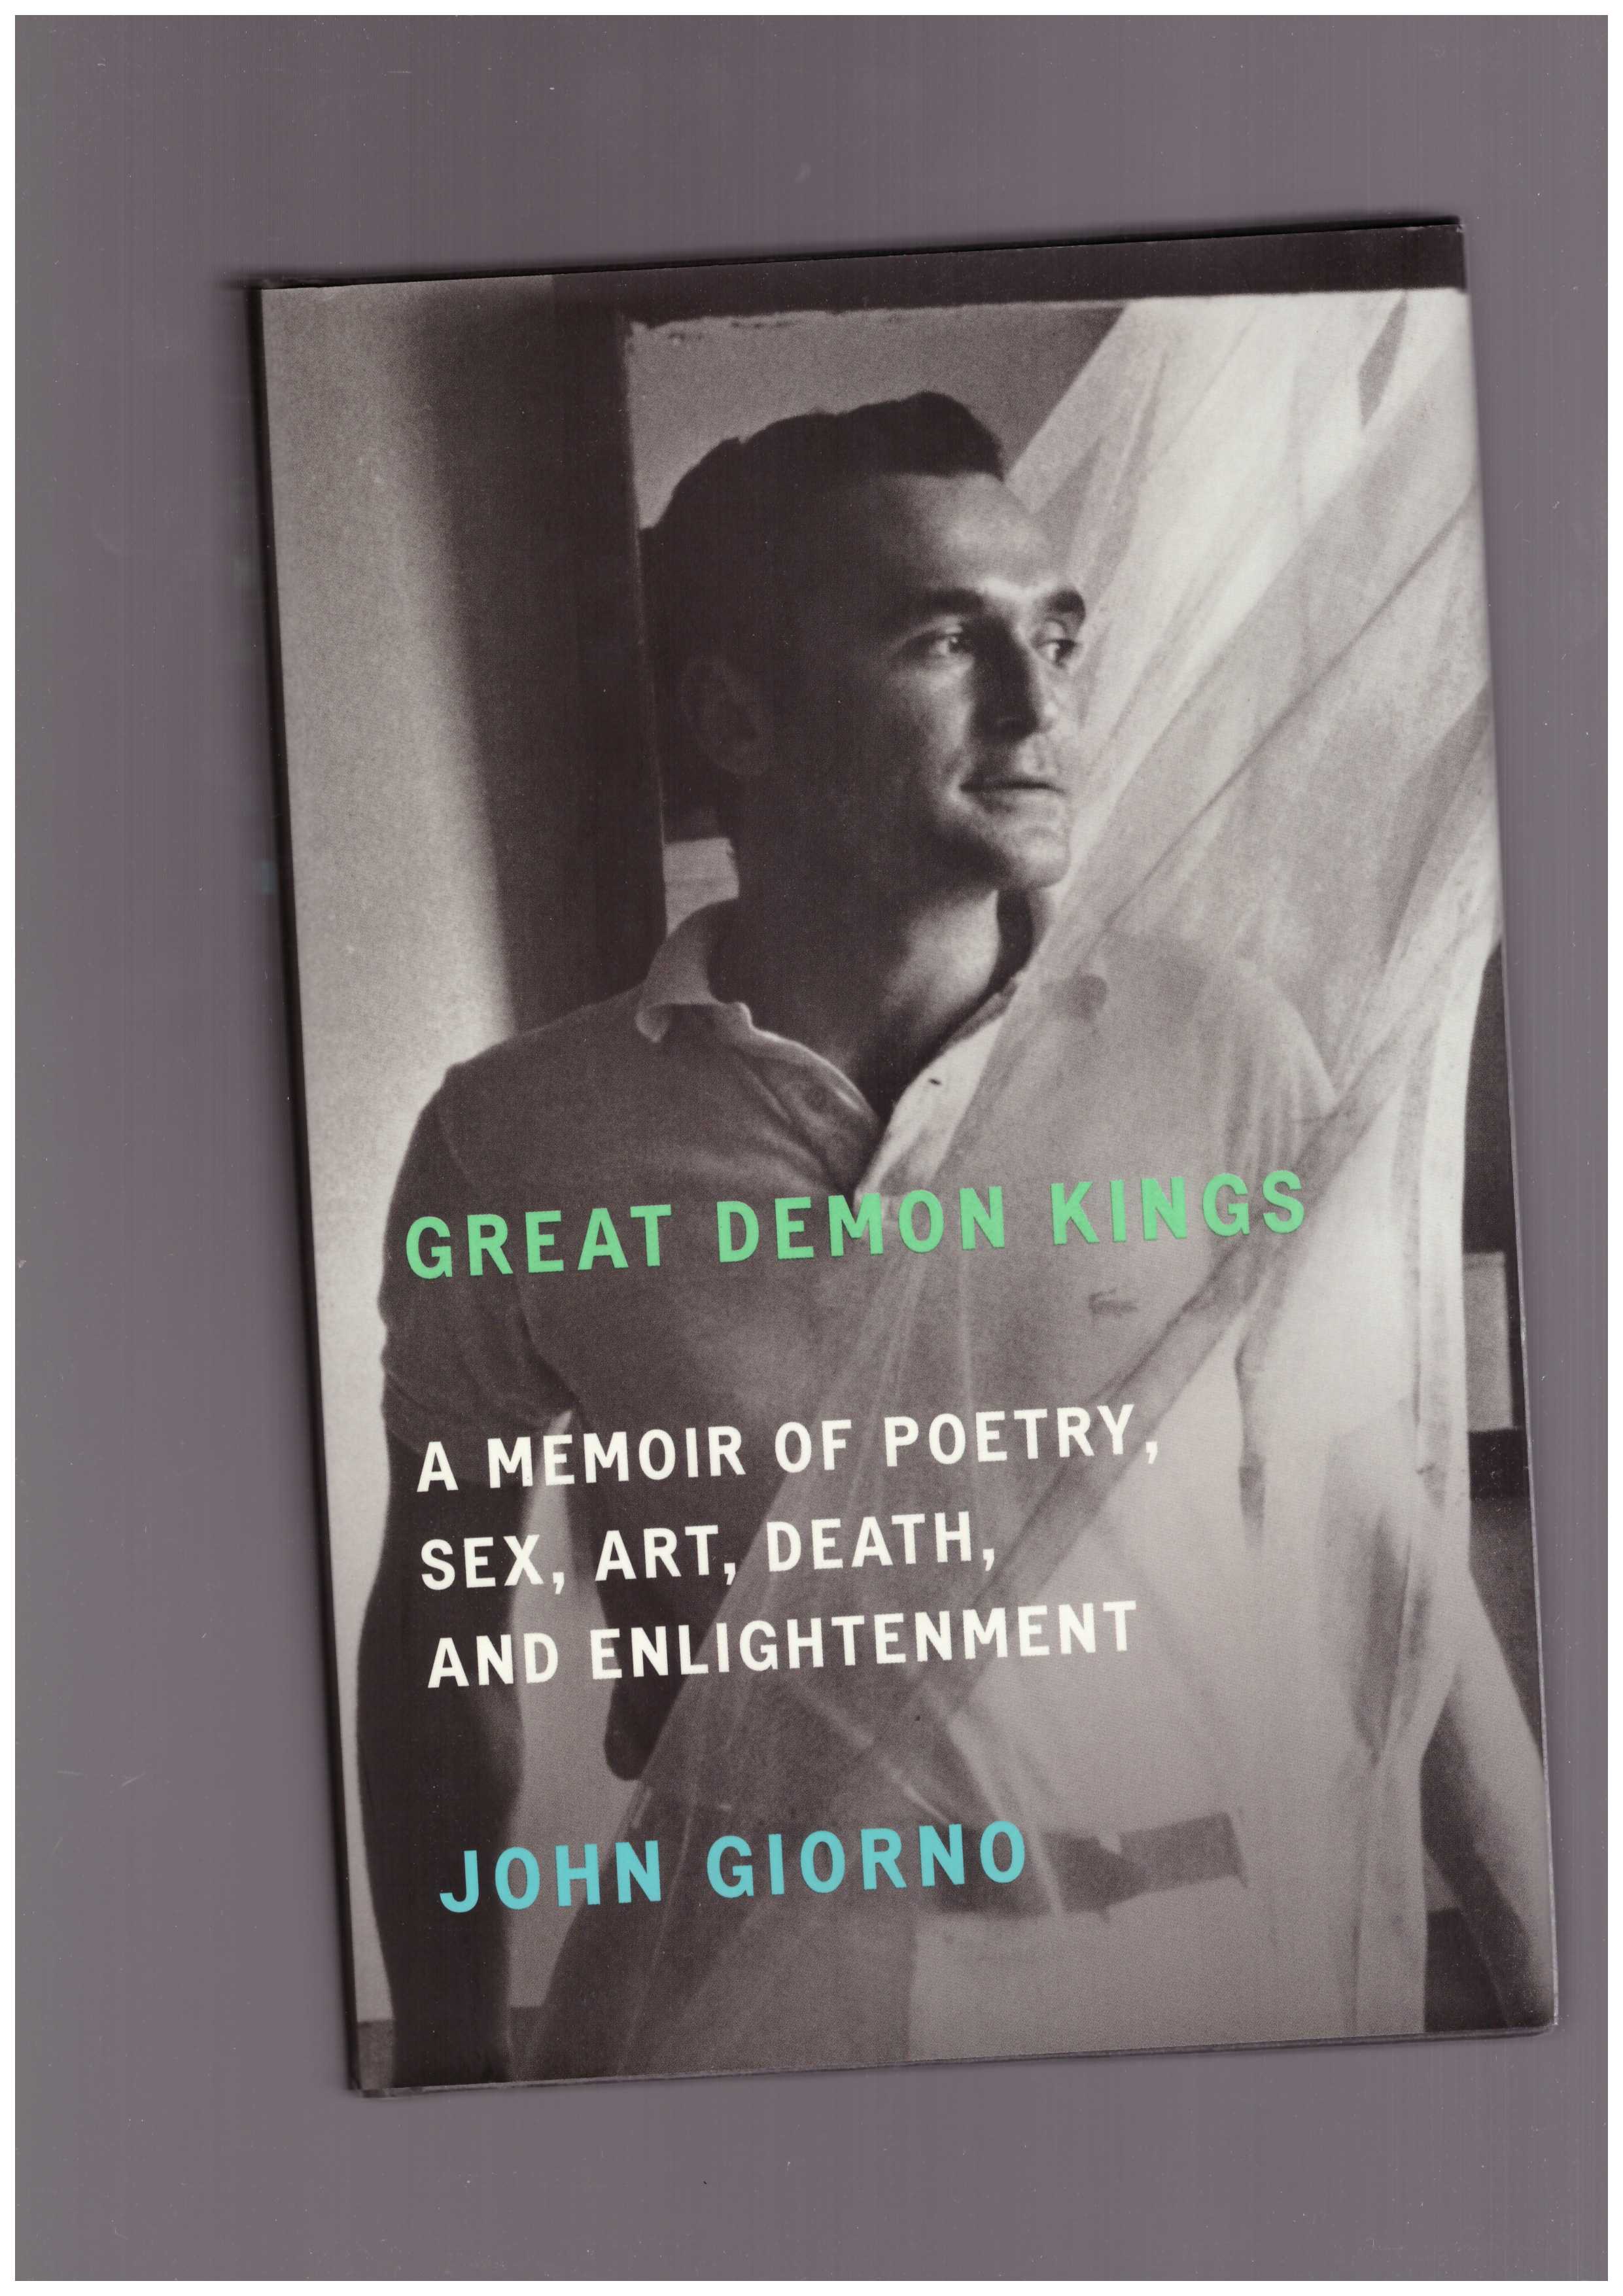 GIORNO, John - Great Demon Kings. A Memoir of Poetry, Sex, Art, Death, and Enlightenment